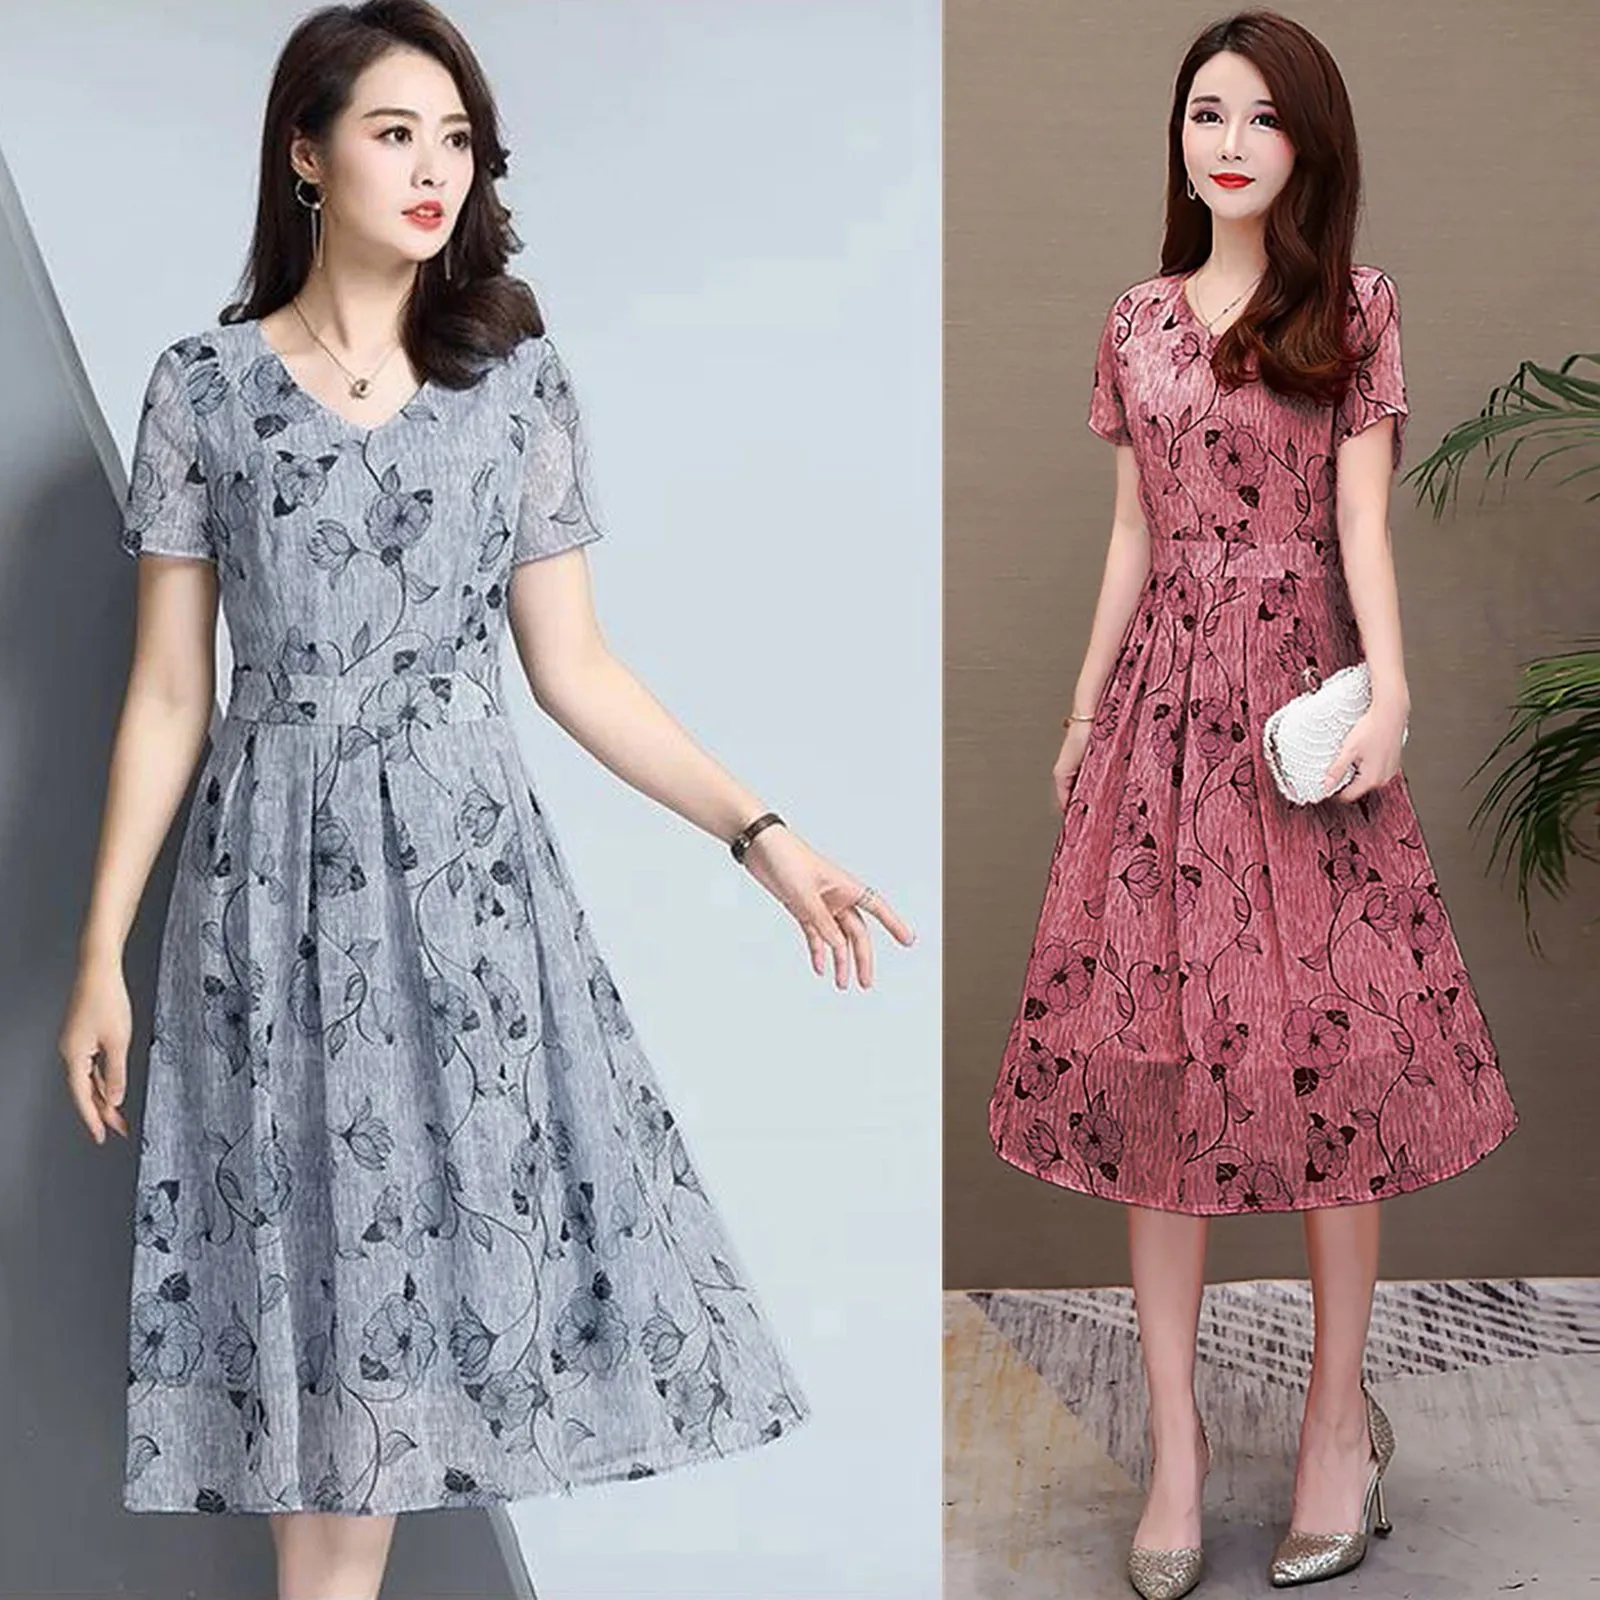 

Fashion Women Casual Floral Printed Sundress Summer V-Neck Short Sleeve A-Line Dress Casual Comfortable Party Long Dress Vestido